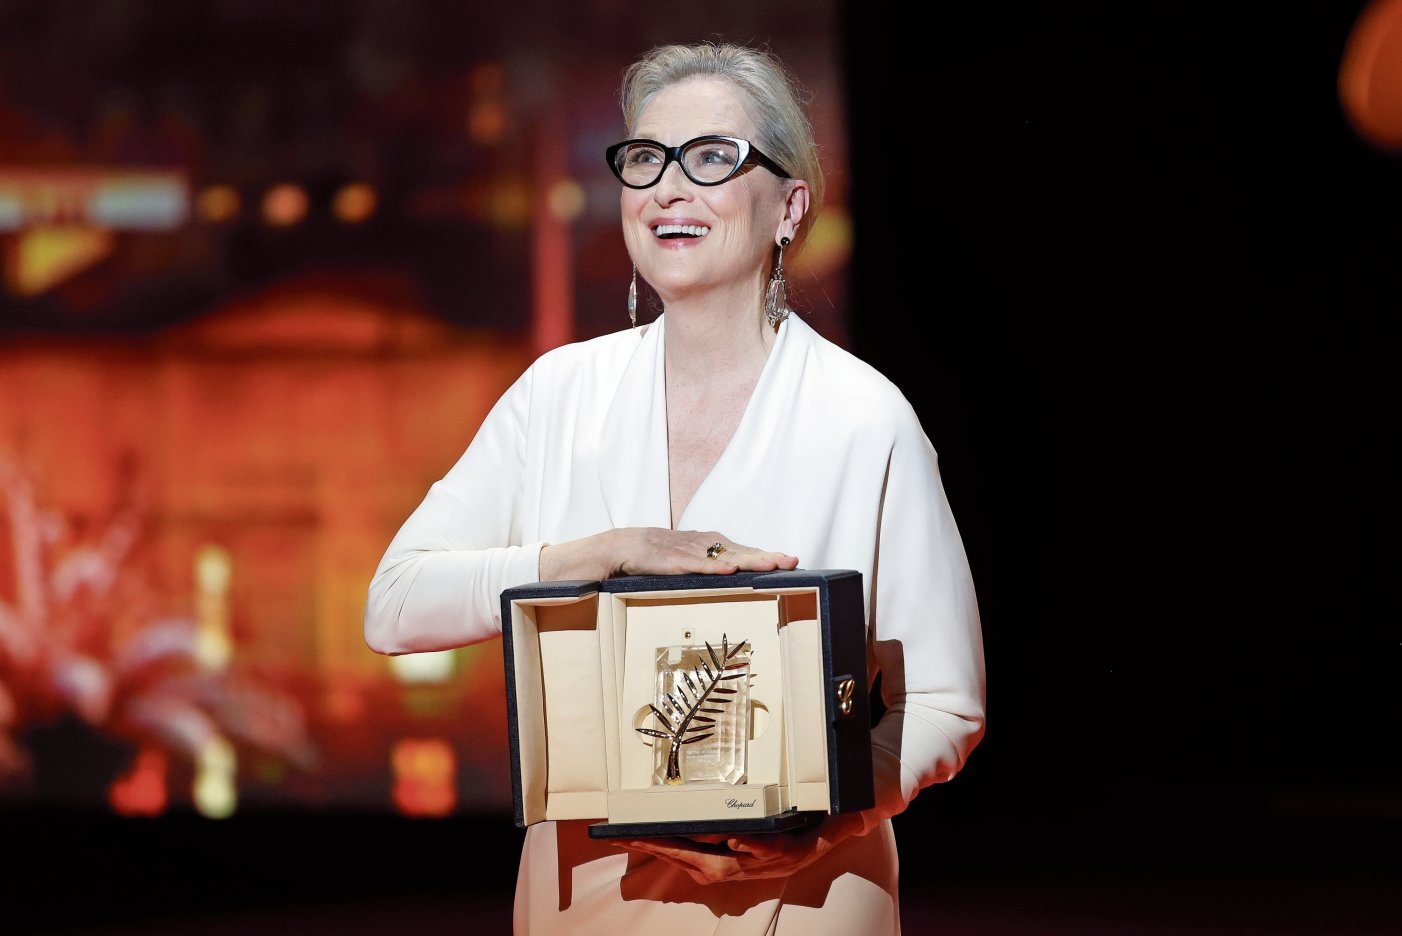 epa11340434 Meryl Streep, 'Palme d'Or d'Honneur', the Honorary Golden Palm award attends the 'Le Deuxieme Acte' (The Second Act) screening and opening ceremony of the 77th annual Cannes Film Festival, in Cannes, France, 14 May 2024. The film festival runs from 14 to 25 May 2024. EPA/SEBASTIEN NOGIER